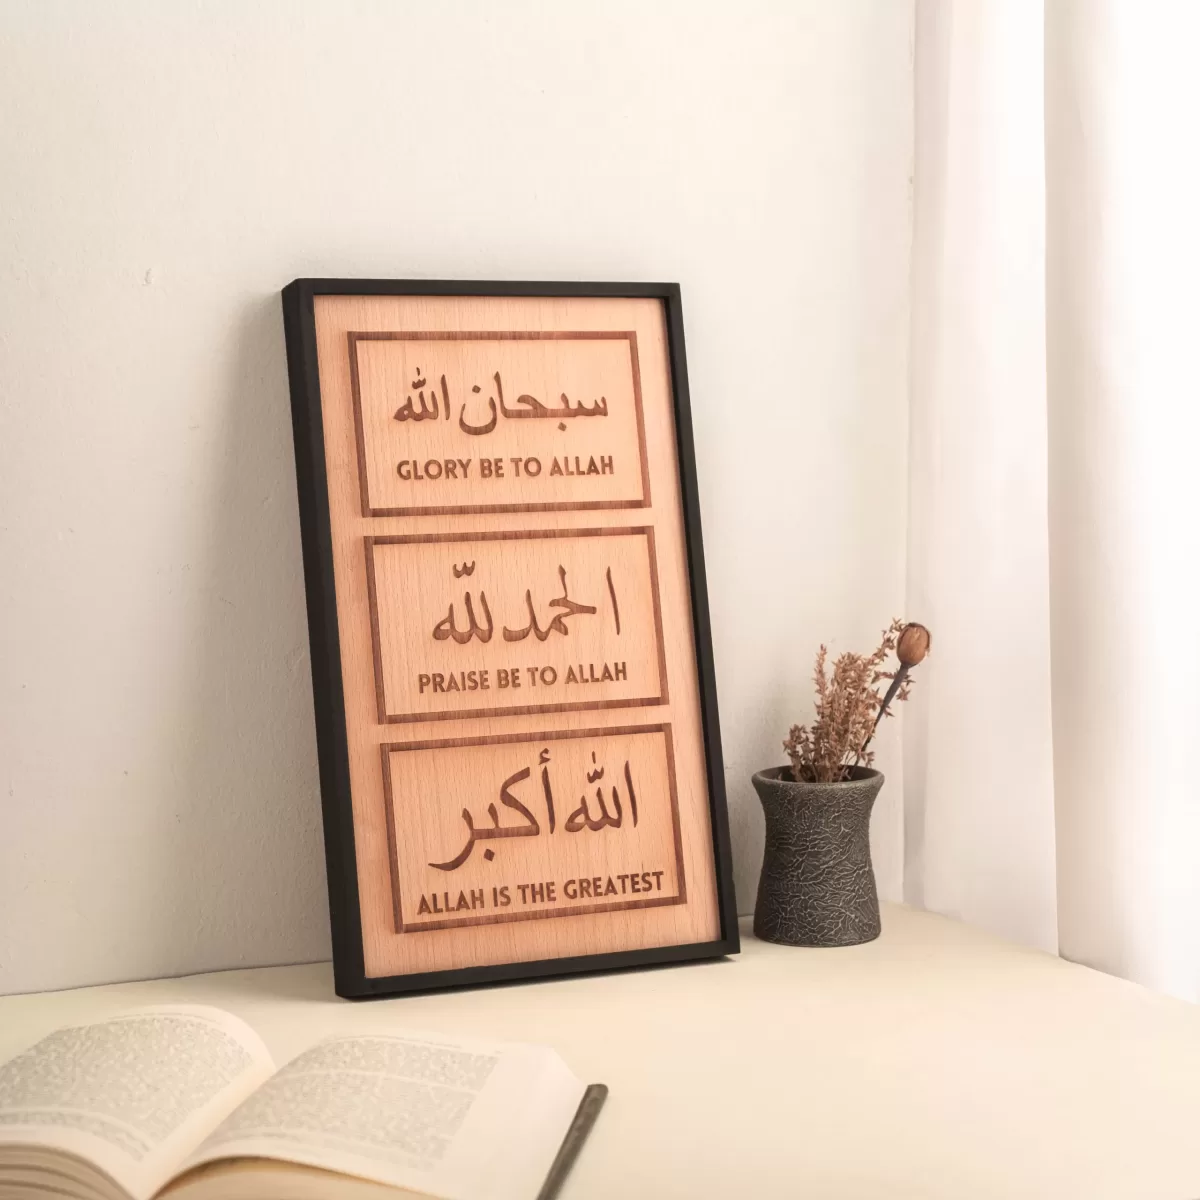 Dhikr Wooden Engraved Frame DSC05078 scaled The Sunnah Store